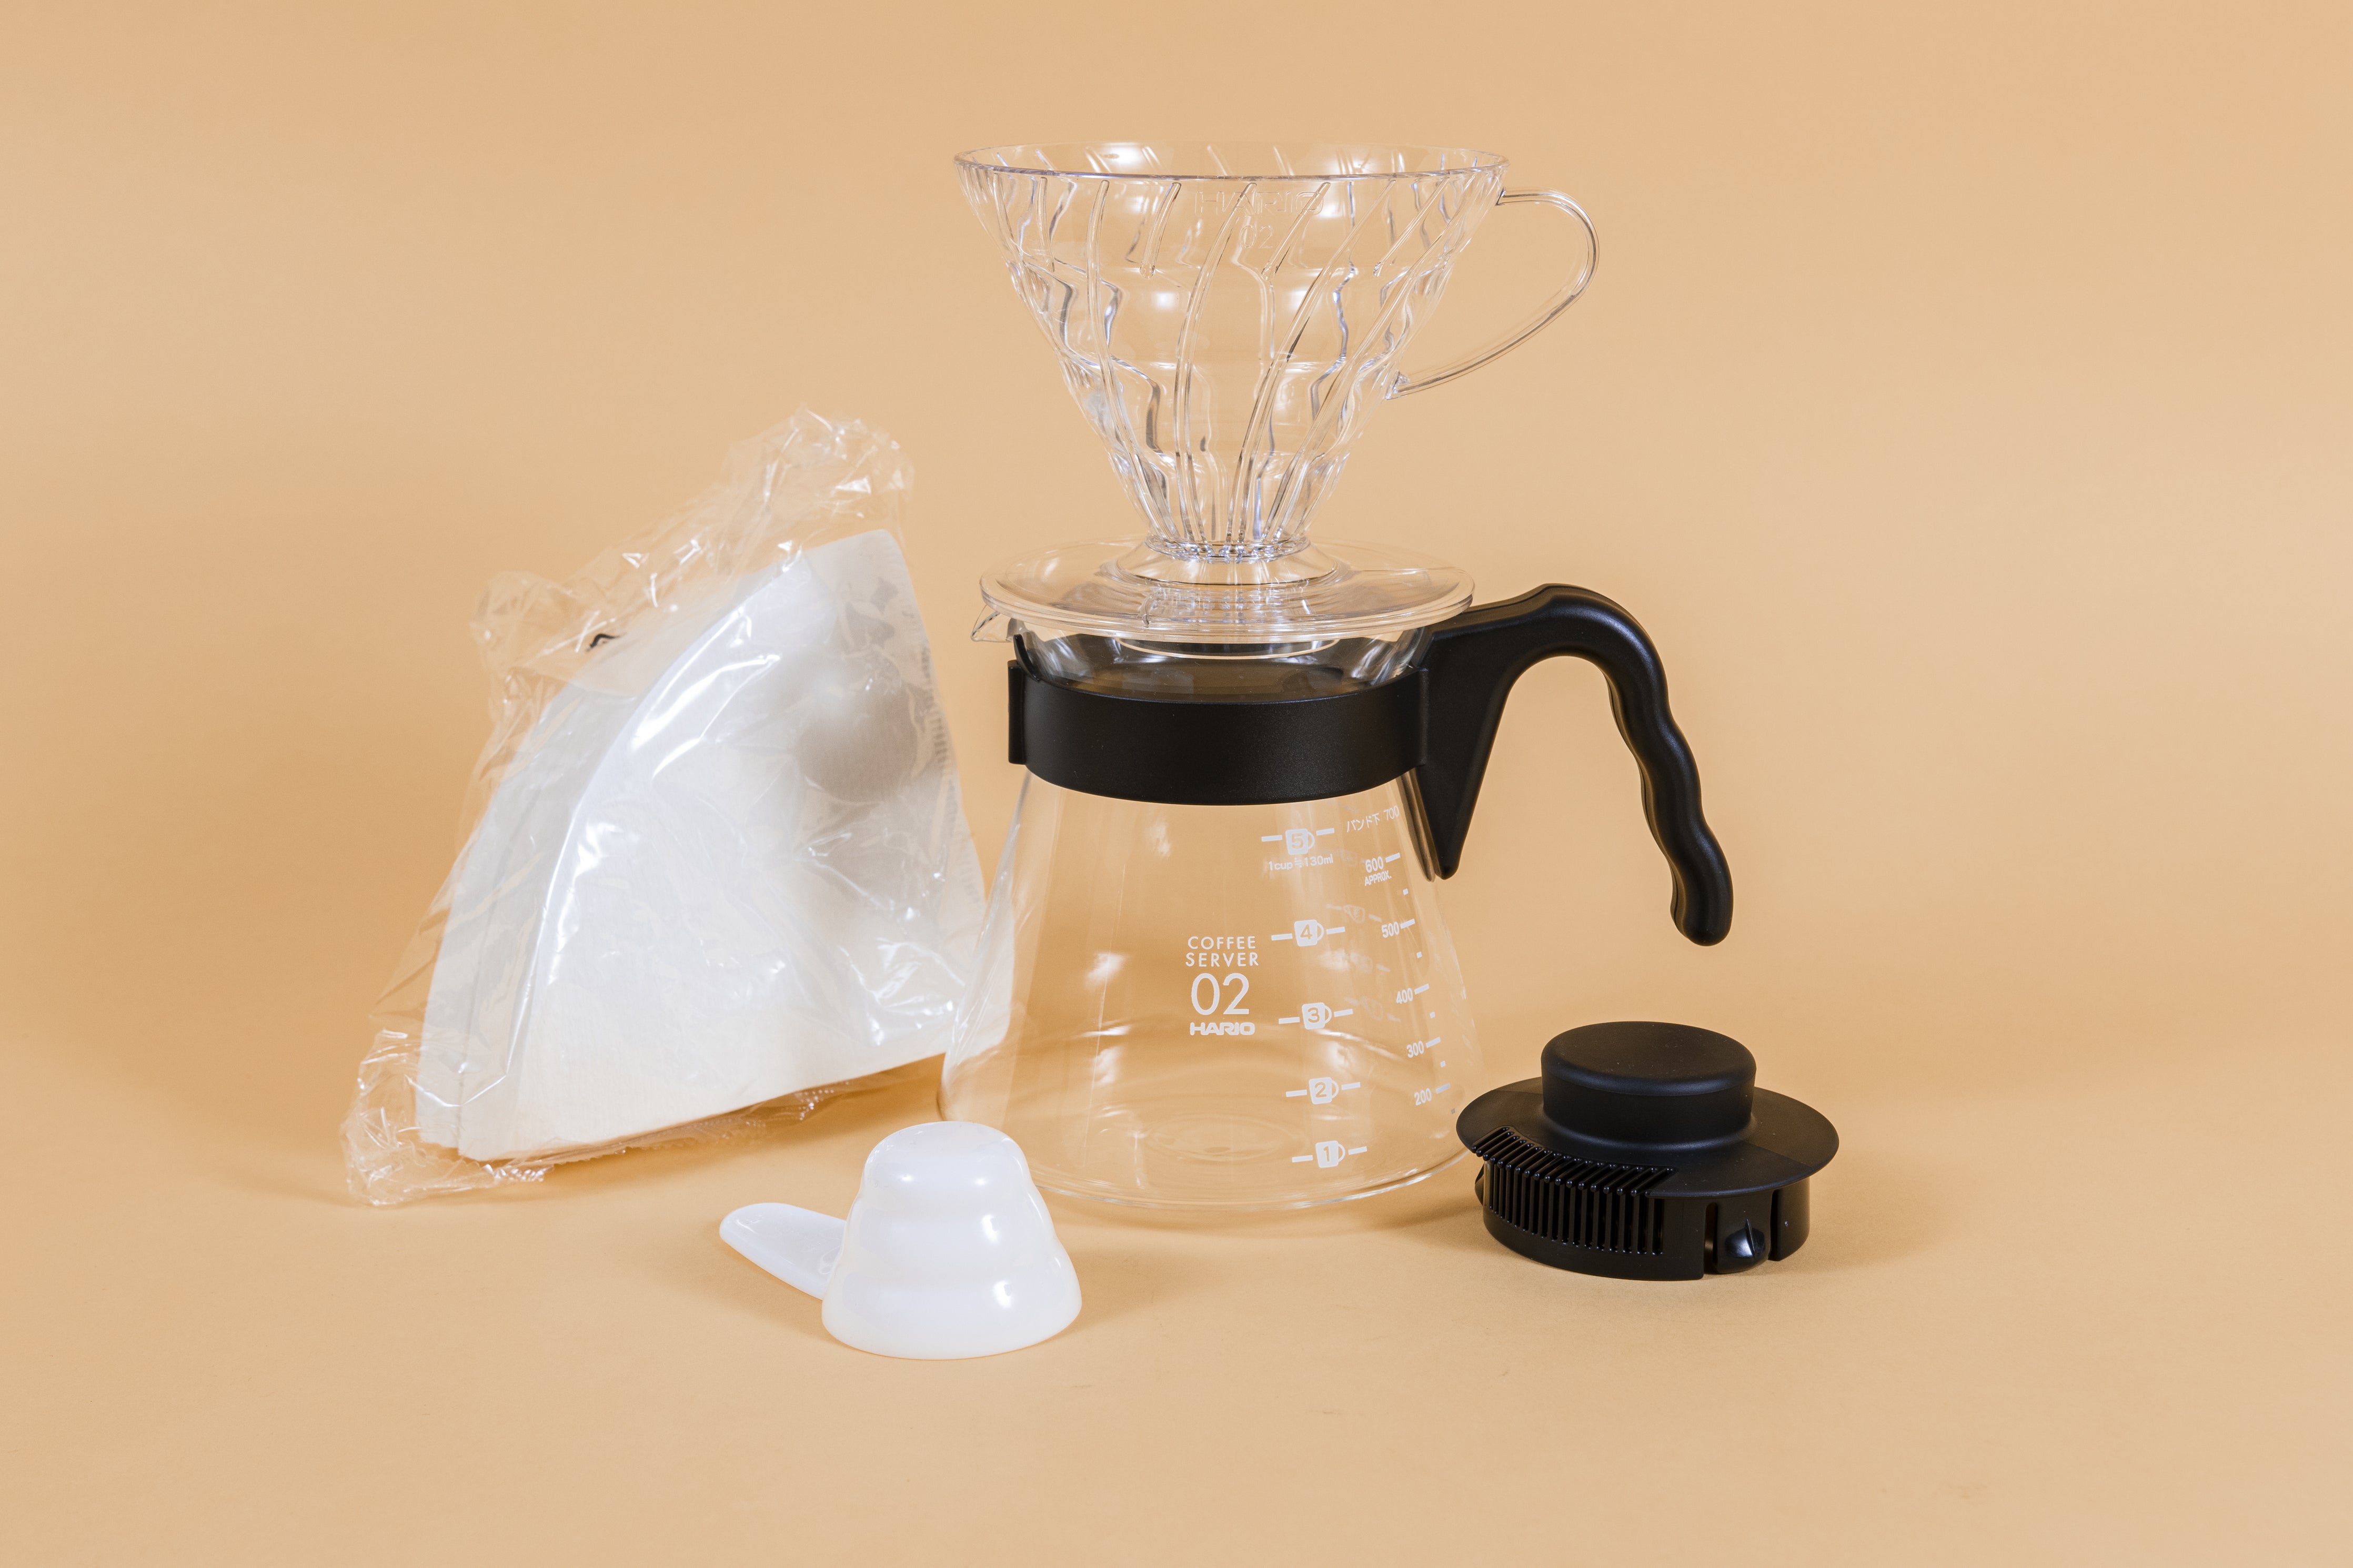 Pour over Coffee Maker Set Coffee Pot Coffee Making Kit with Bag